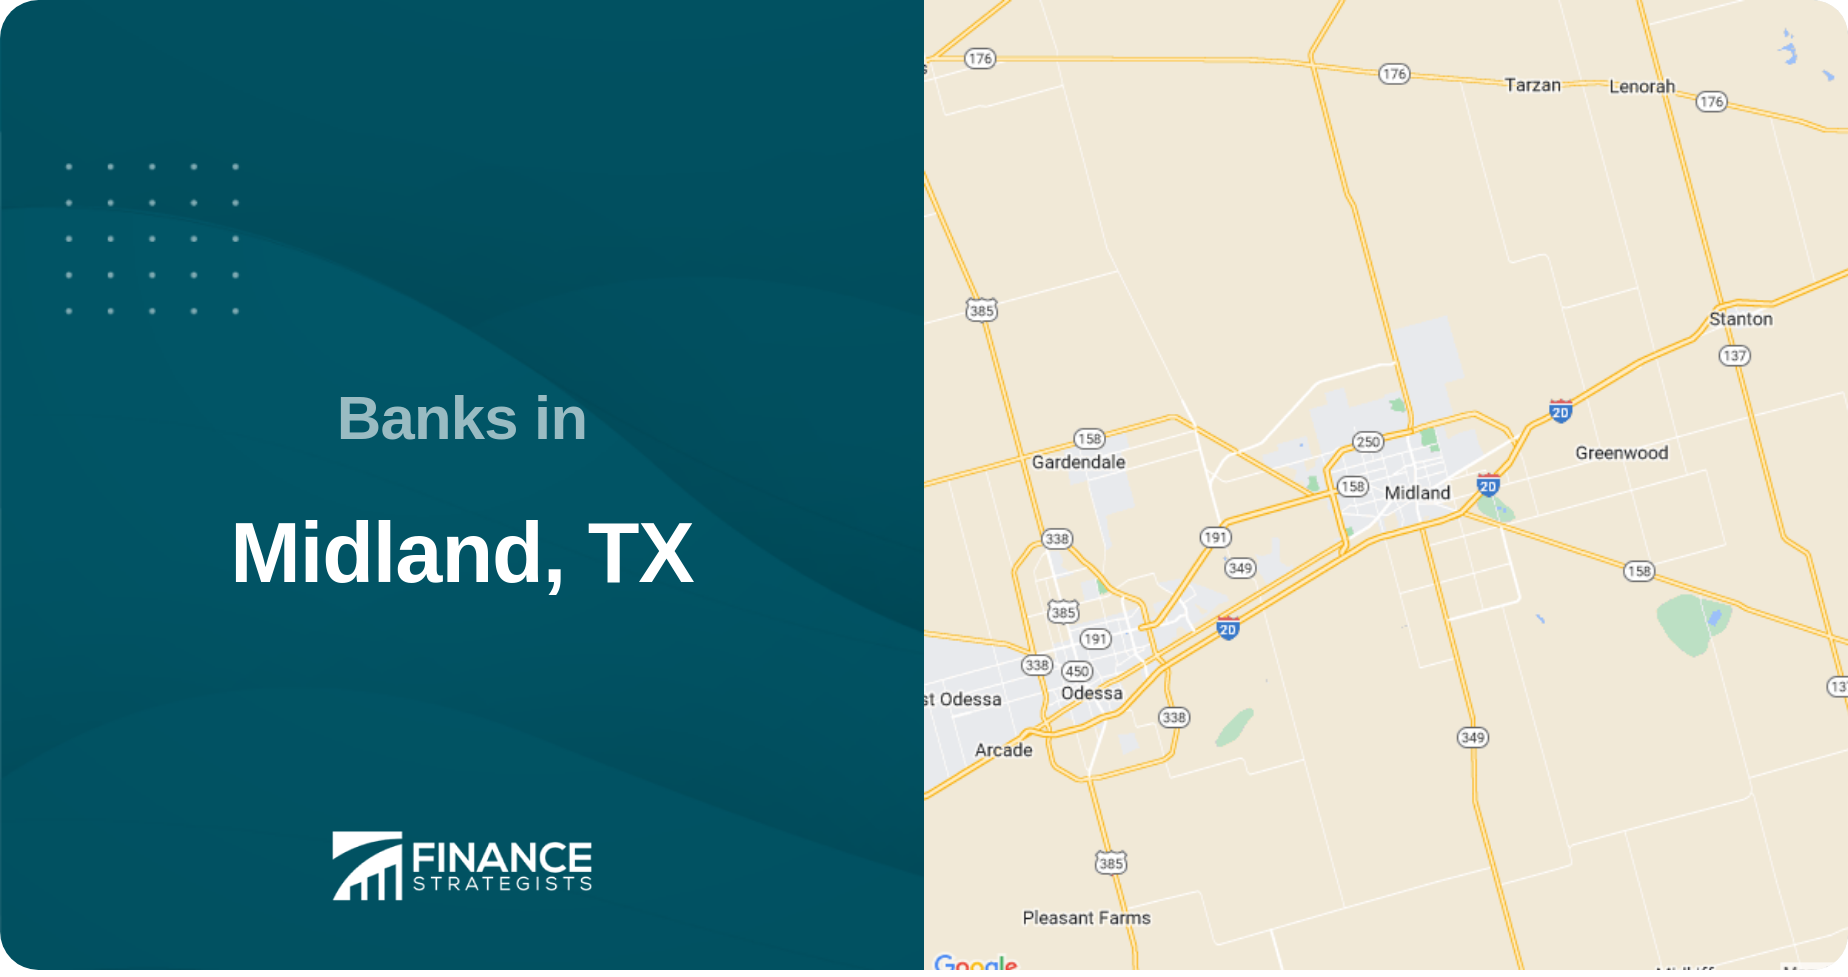 Banks in Midland, TX